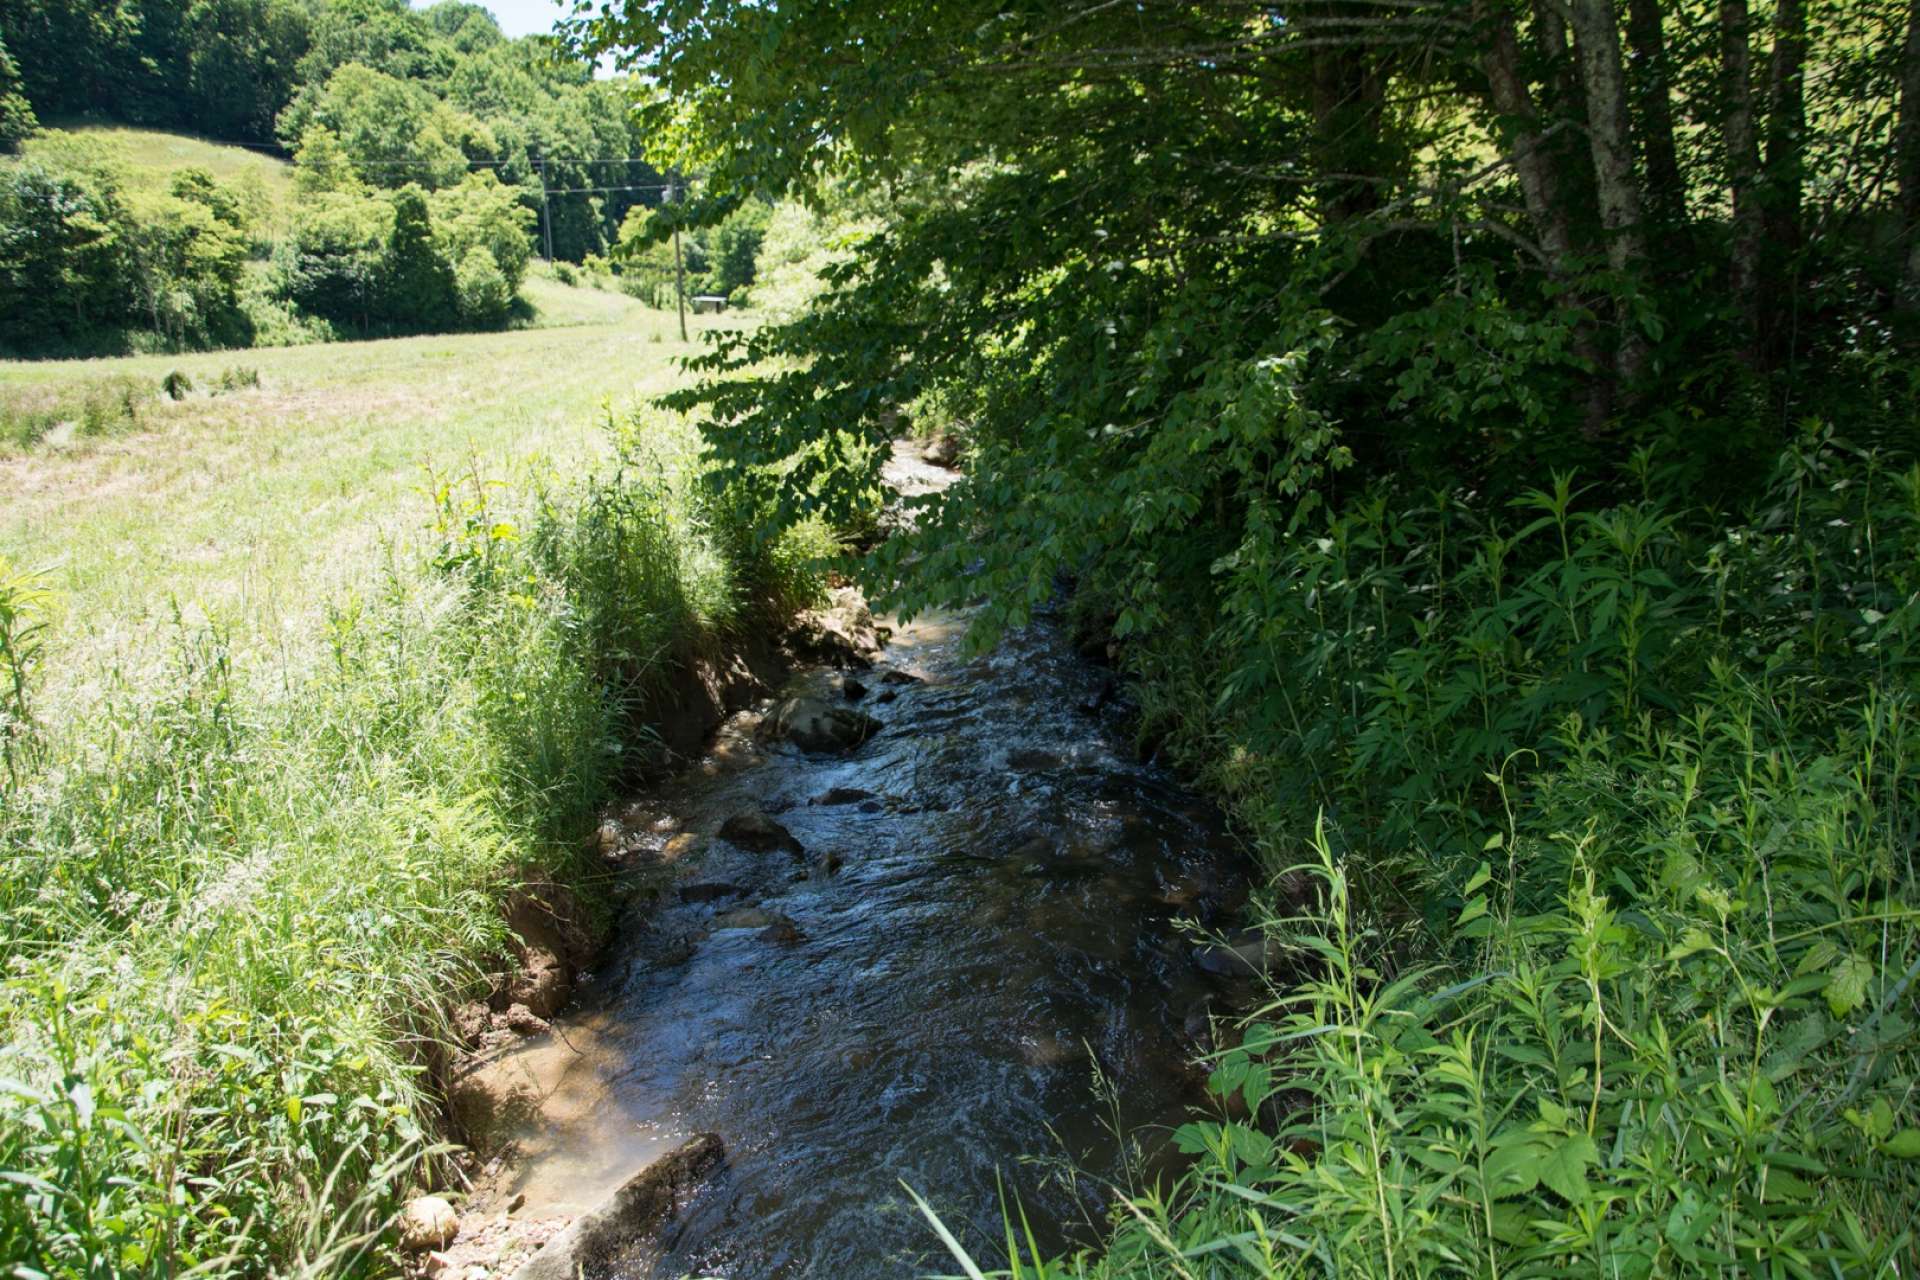 This bold mountain stream runs through the meadow providing a water source for livestock and maybe pond potential.